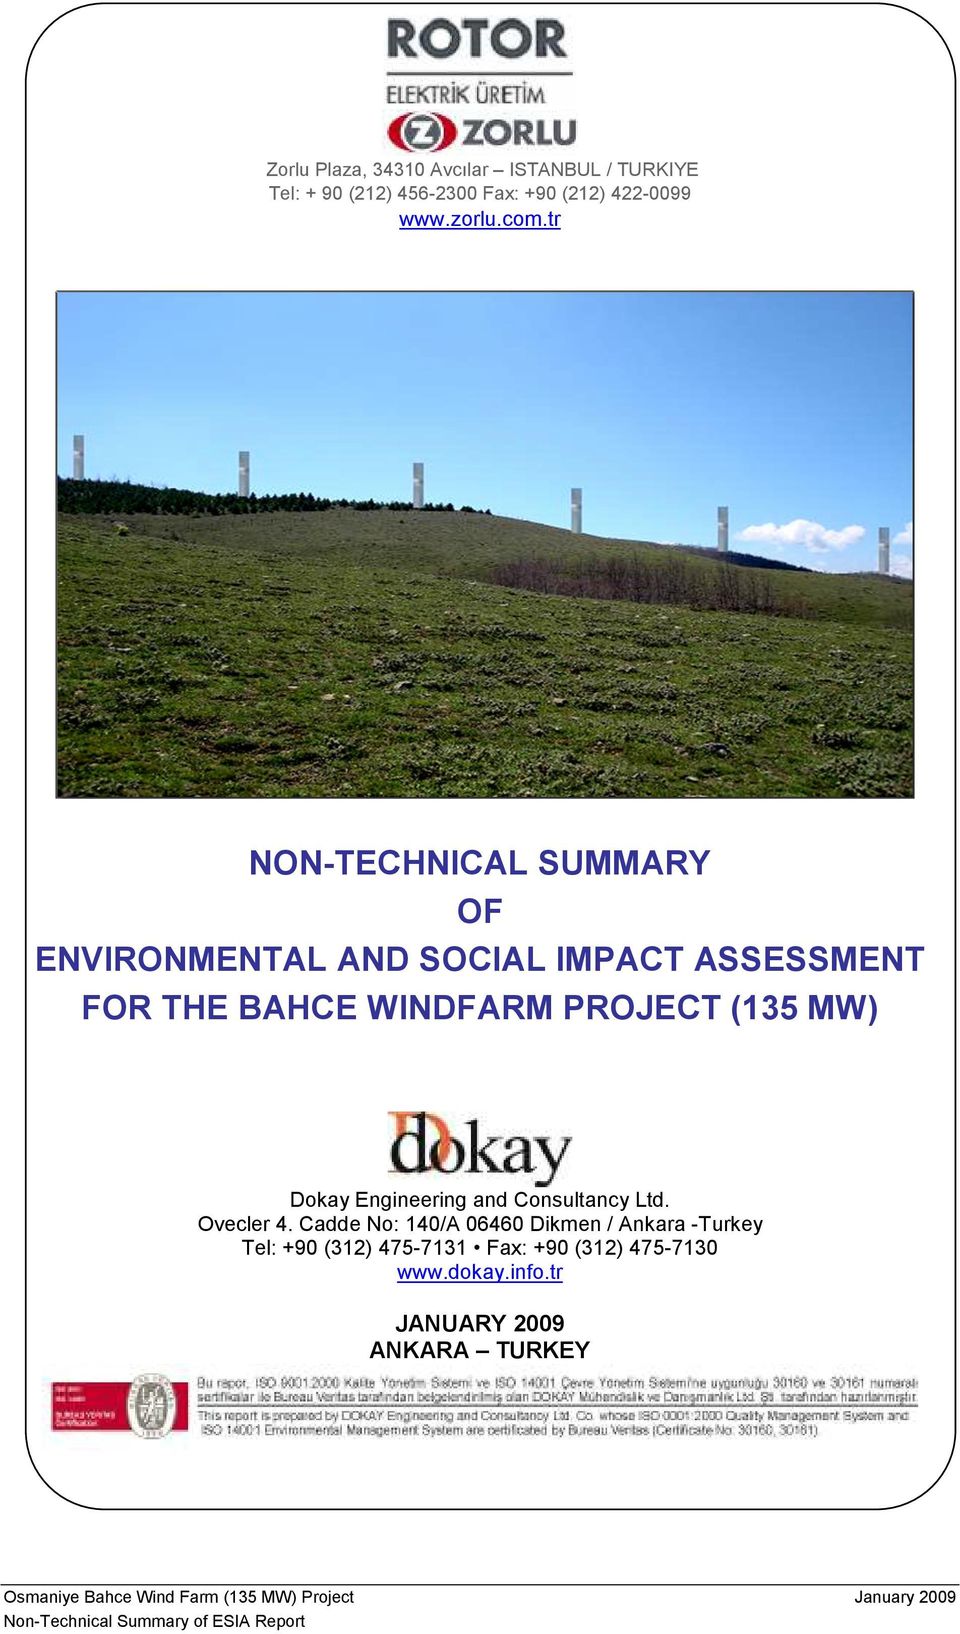 tr NON-TECHNICAL SUMMARY OF ENVIRONMENTAL AND SOCIAL IMPACT ASSESSMENT FOR THE BAHCE WINDFARM PROJECT